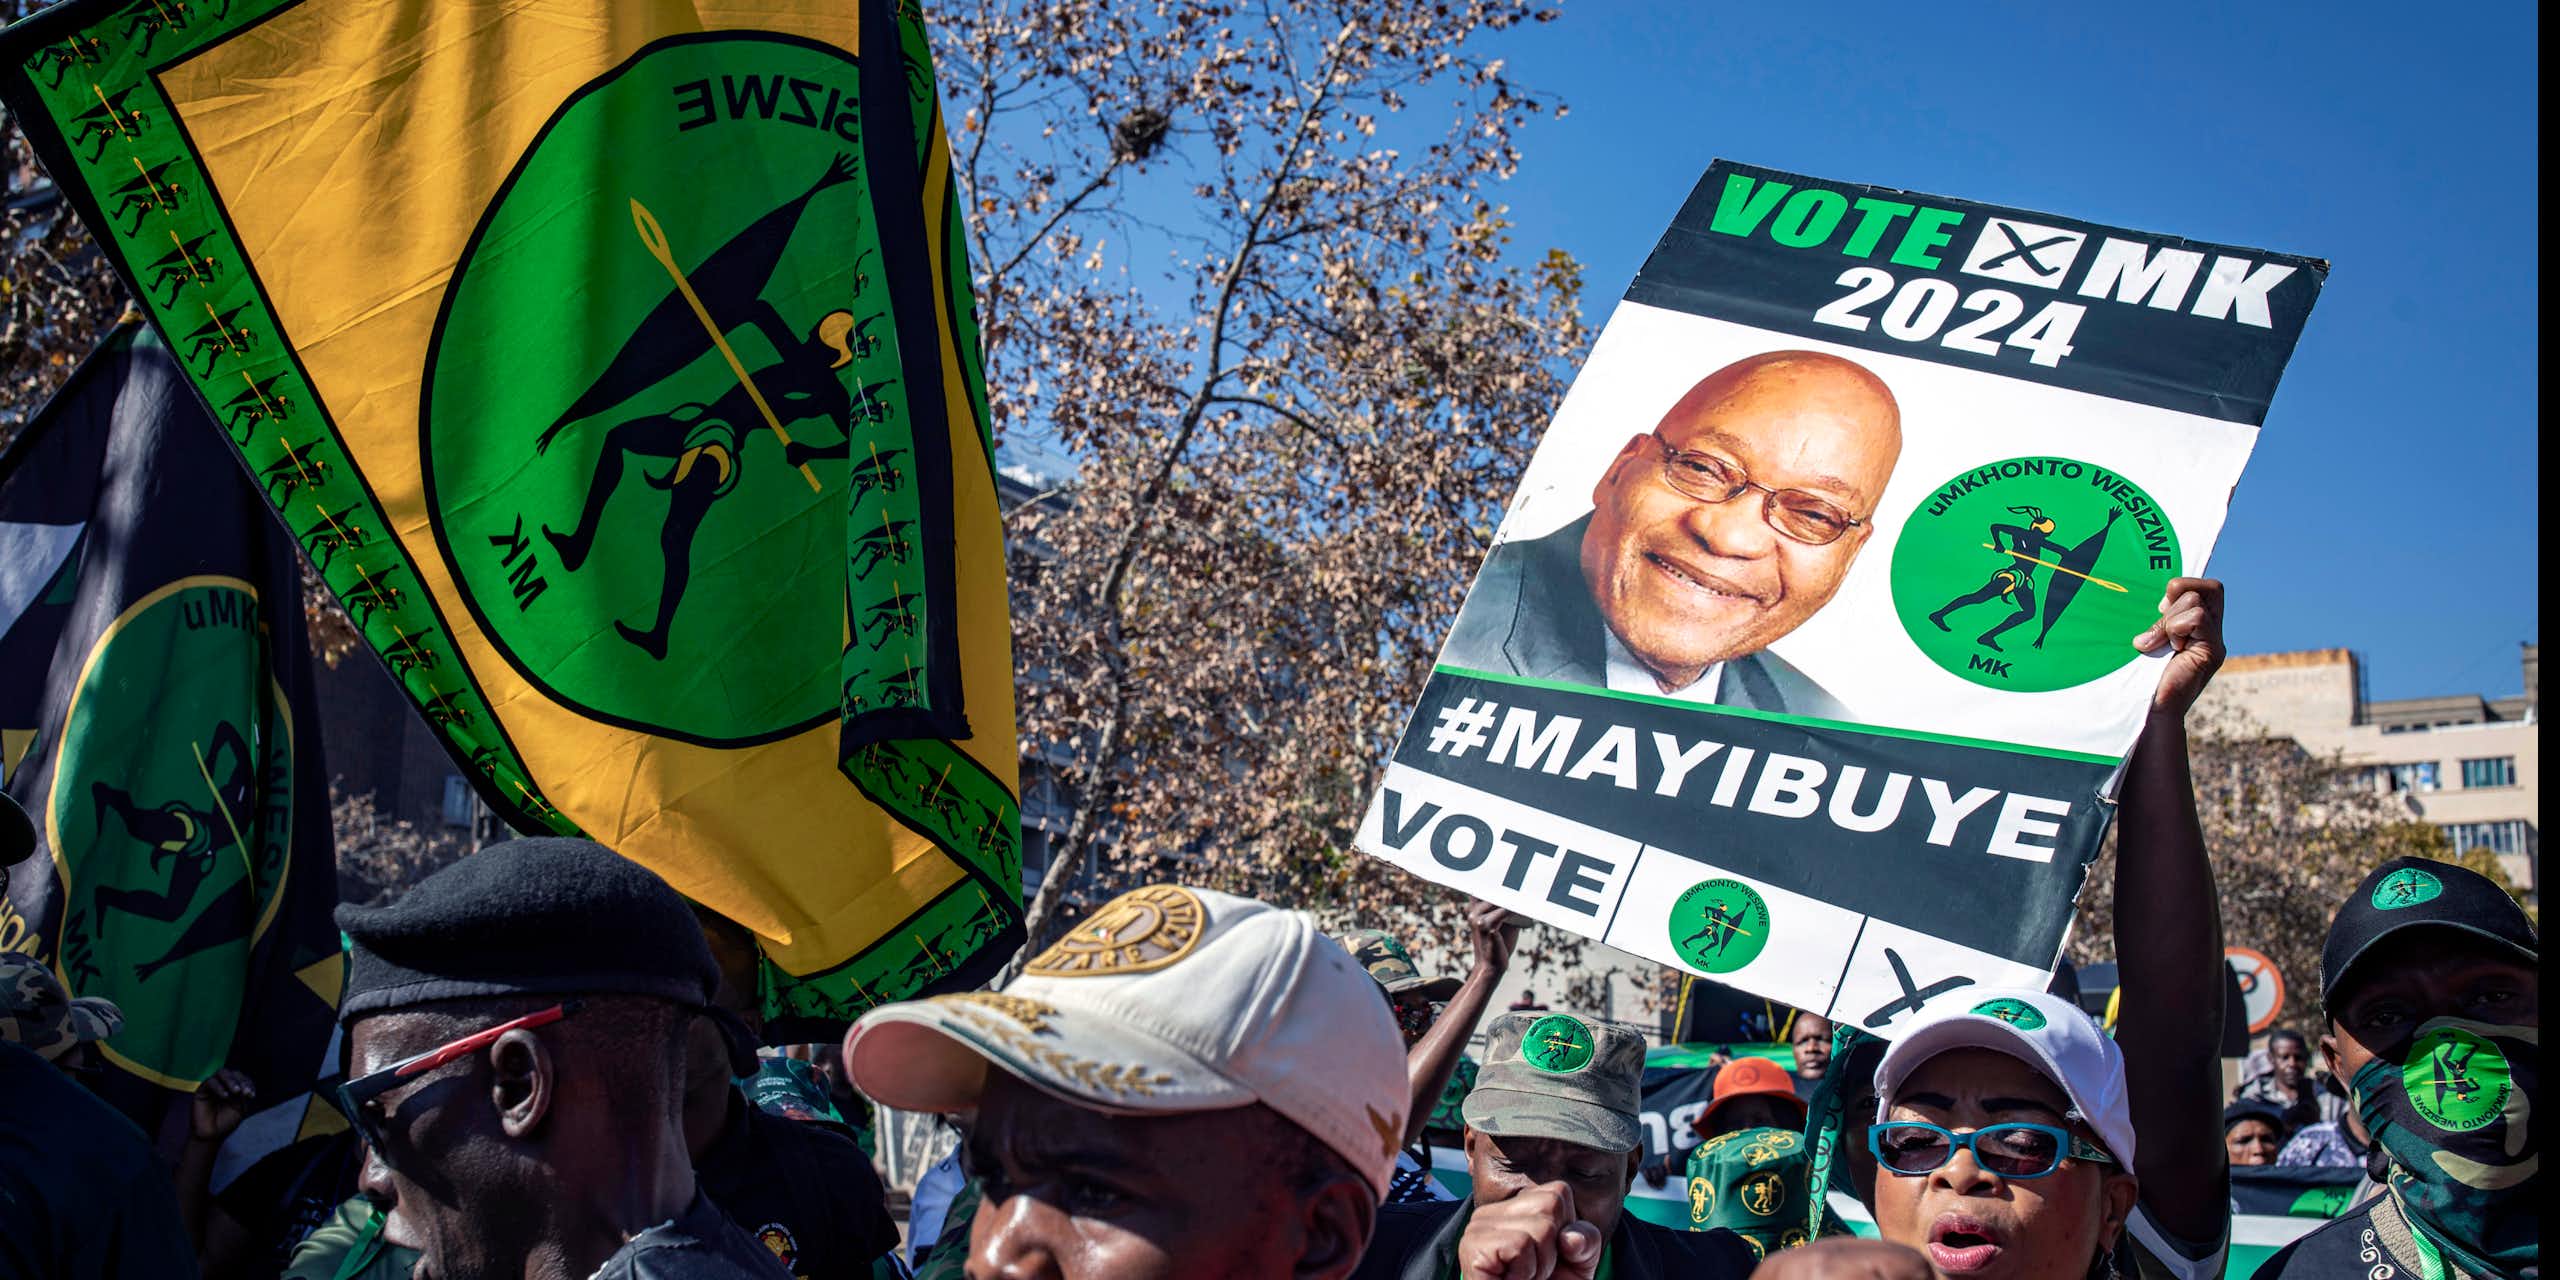 A small crowd of people in an urban setting hold up posters and banners - a poster reading "Vote MK 2024 #Mayibuye" and a green, gold and black banner with the letters "MK" below an illustration of a figure holding a spear.